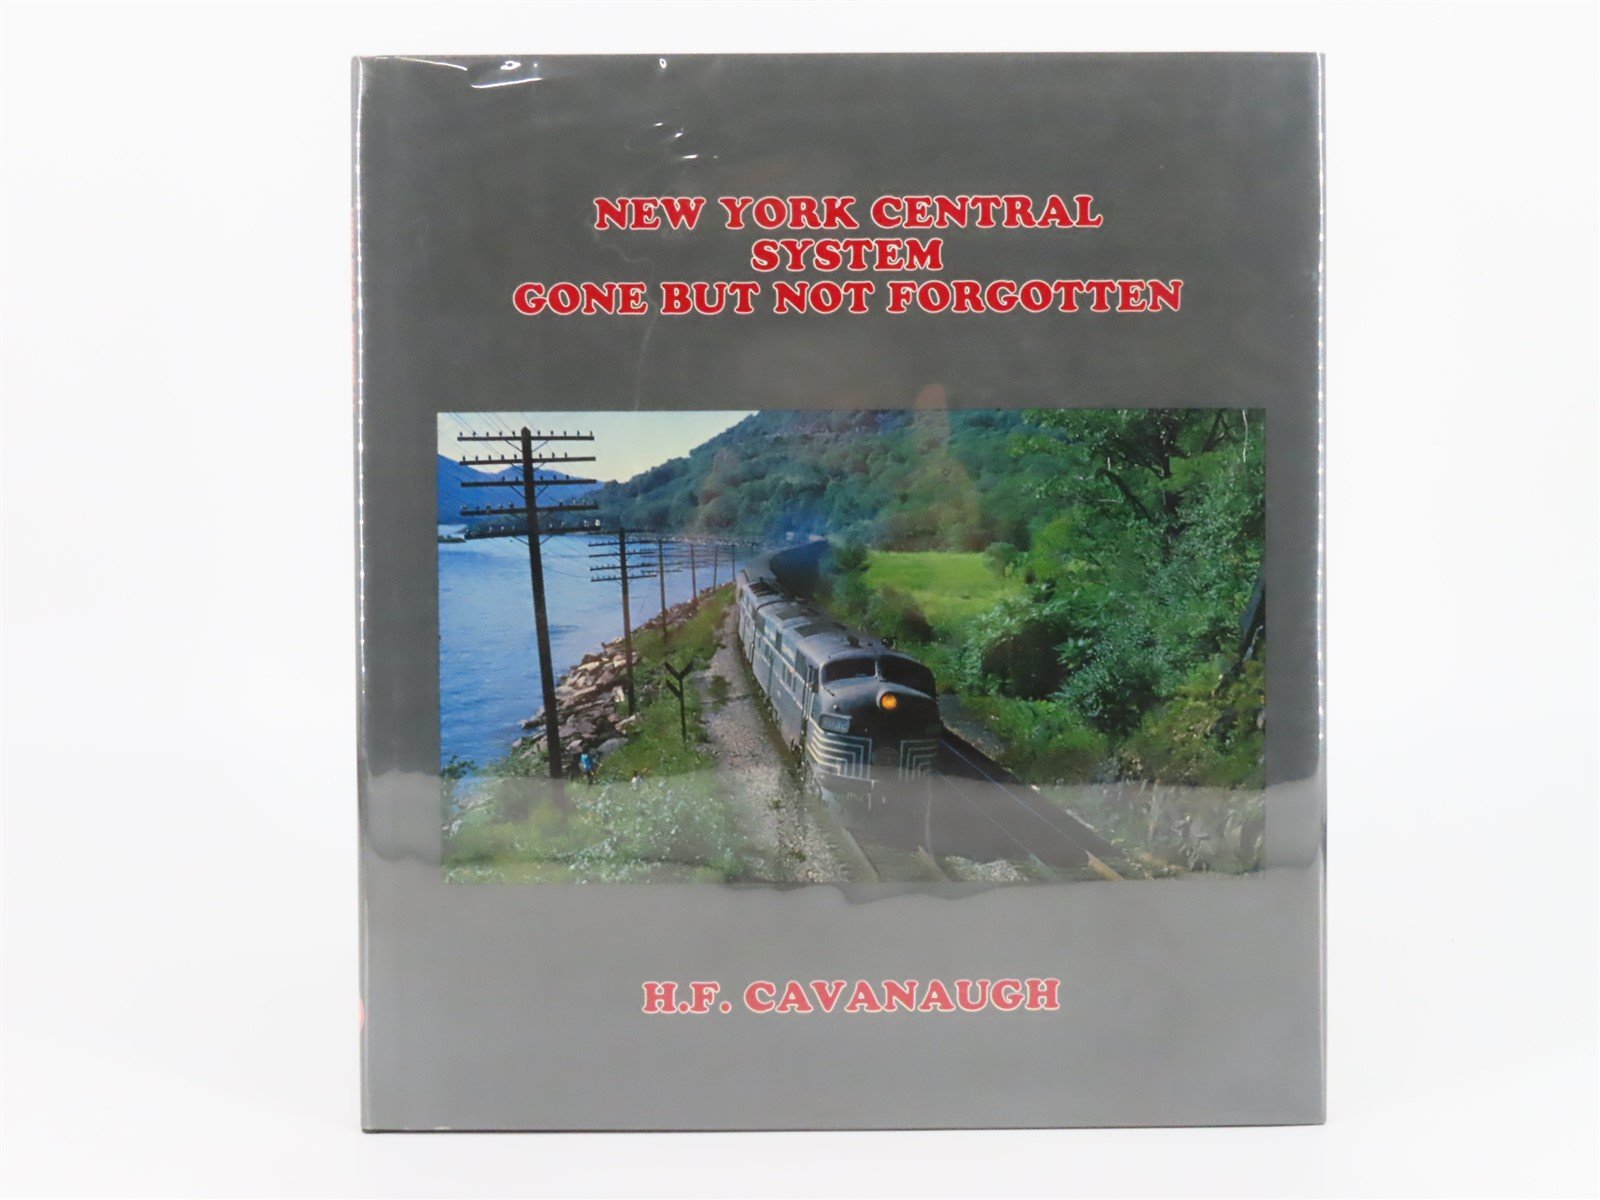 New York Central System: Gone But Not Forgotten by H.F. Cavanaugh ©1983 HC Book